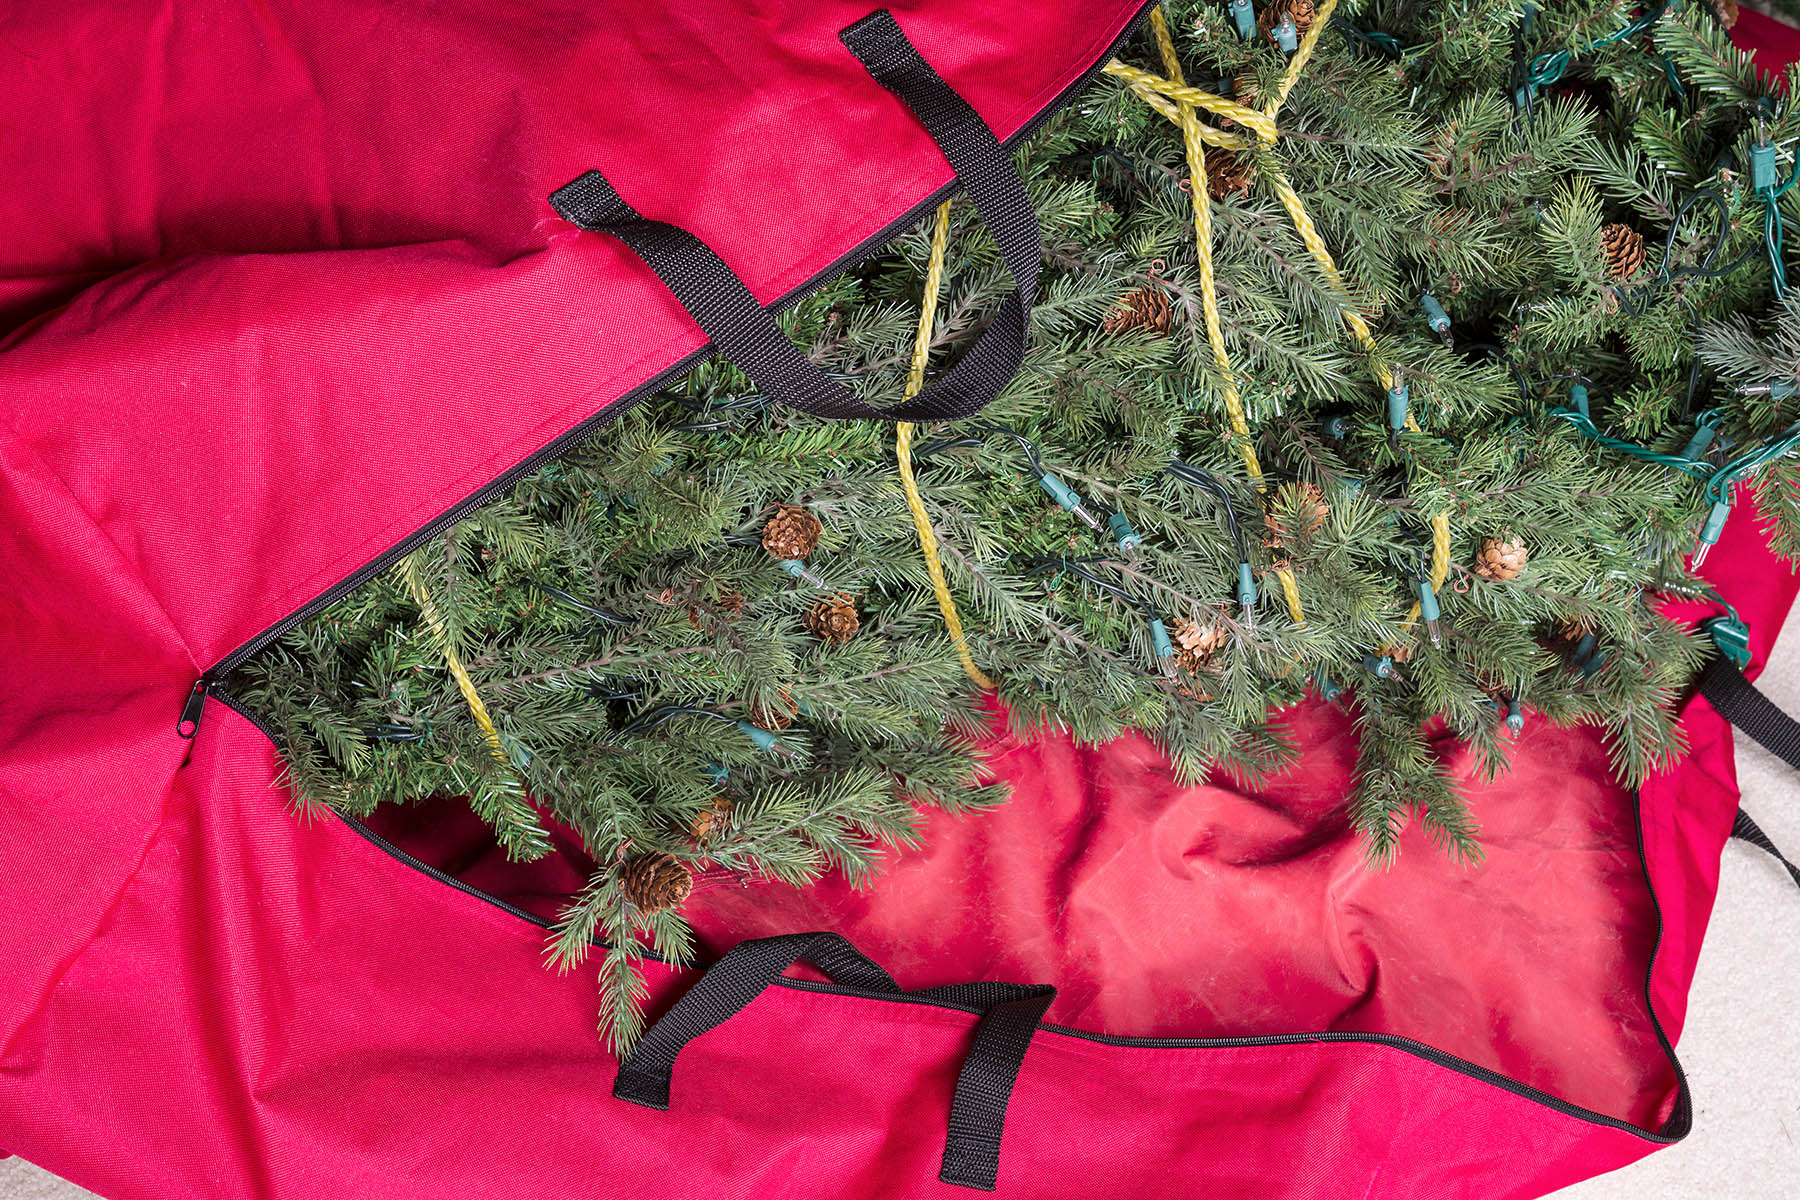 How to Properly Store a Christmas Tree: A Step-by-Step Guide